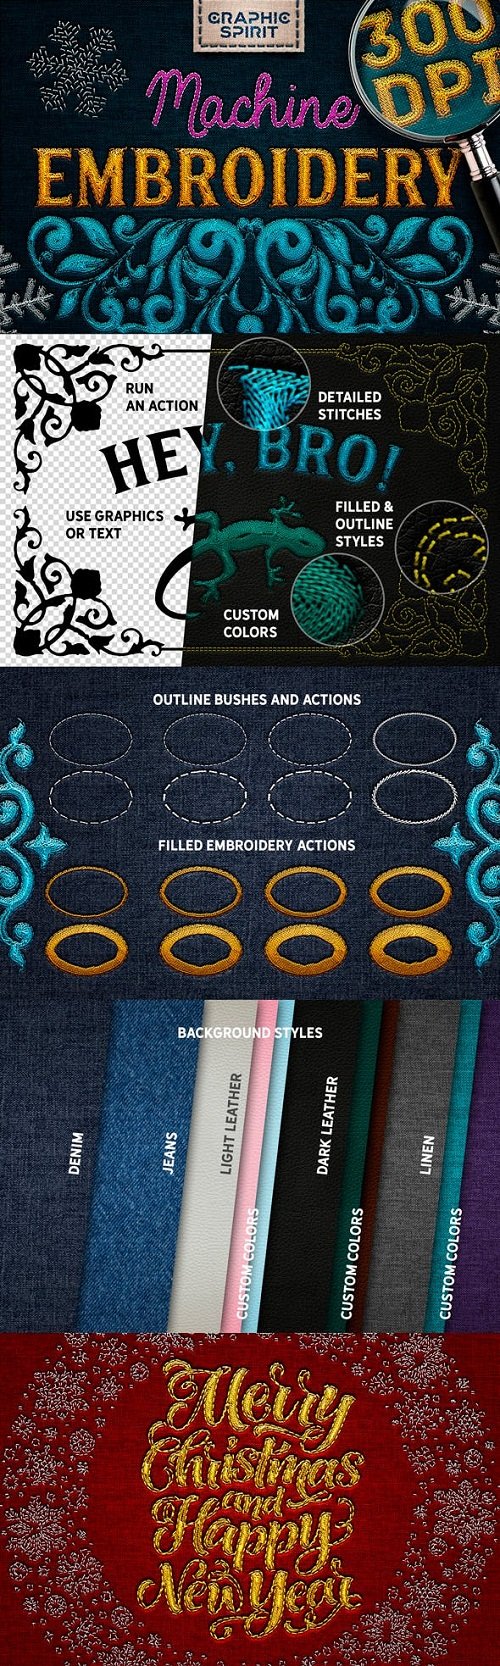 Machine Embroidery Actions For Adobe Photoshop